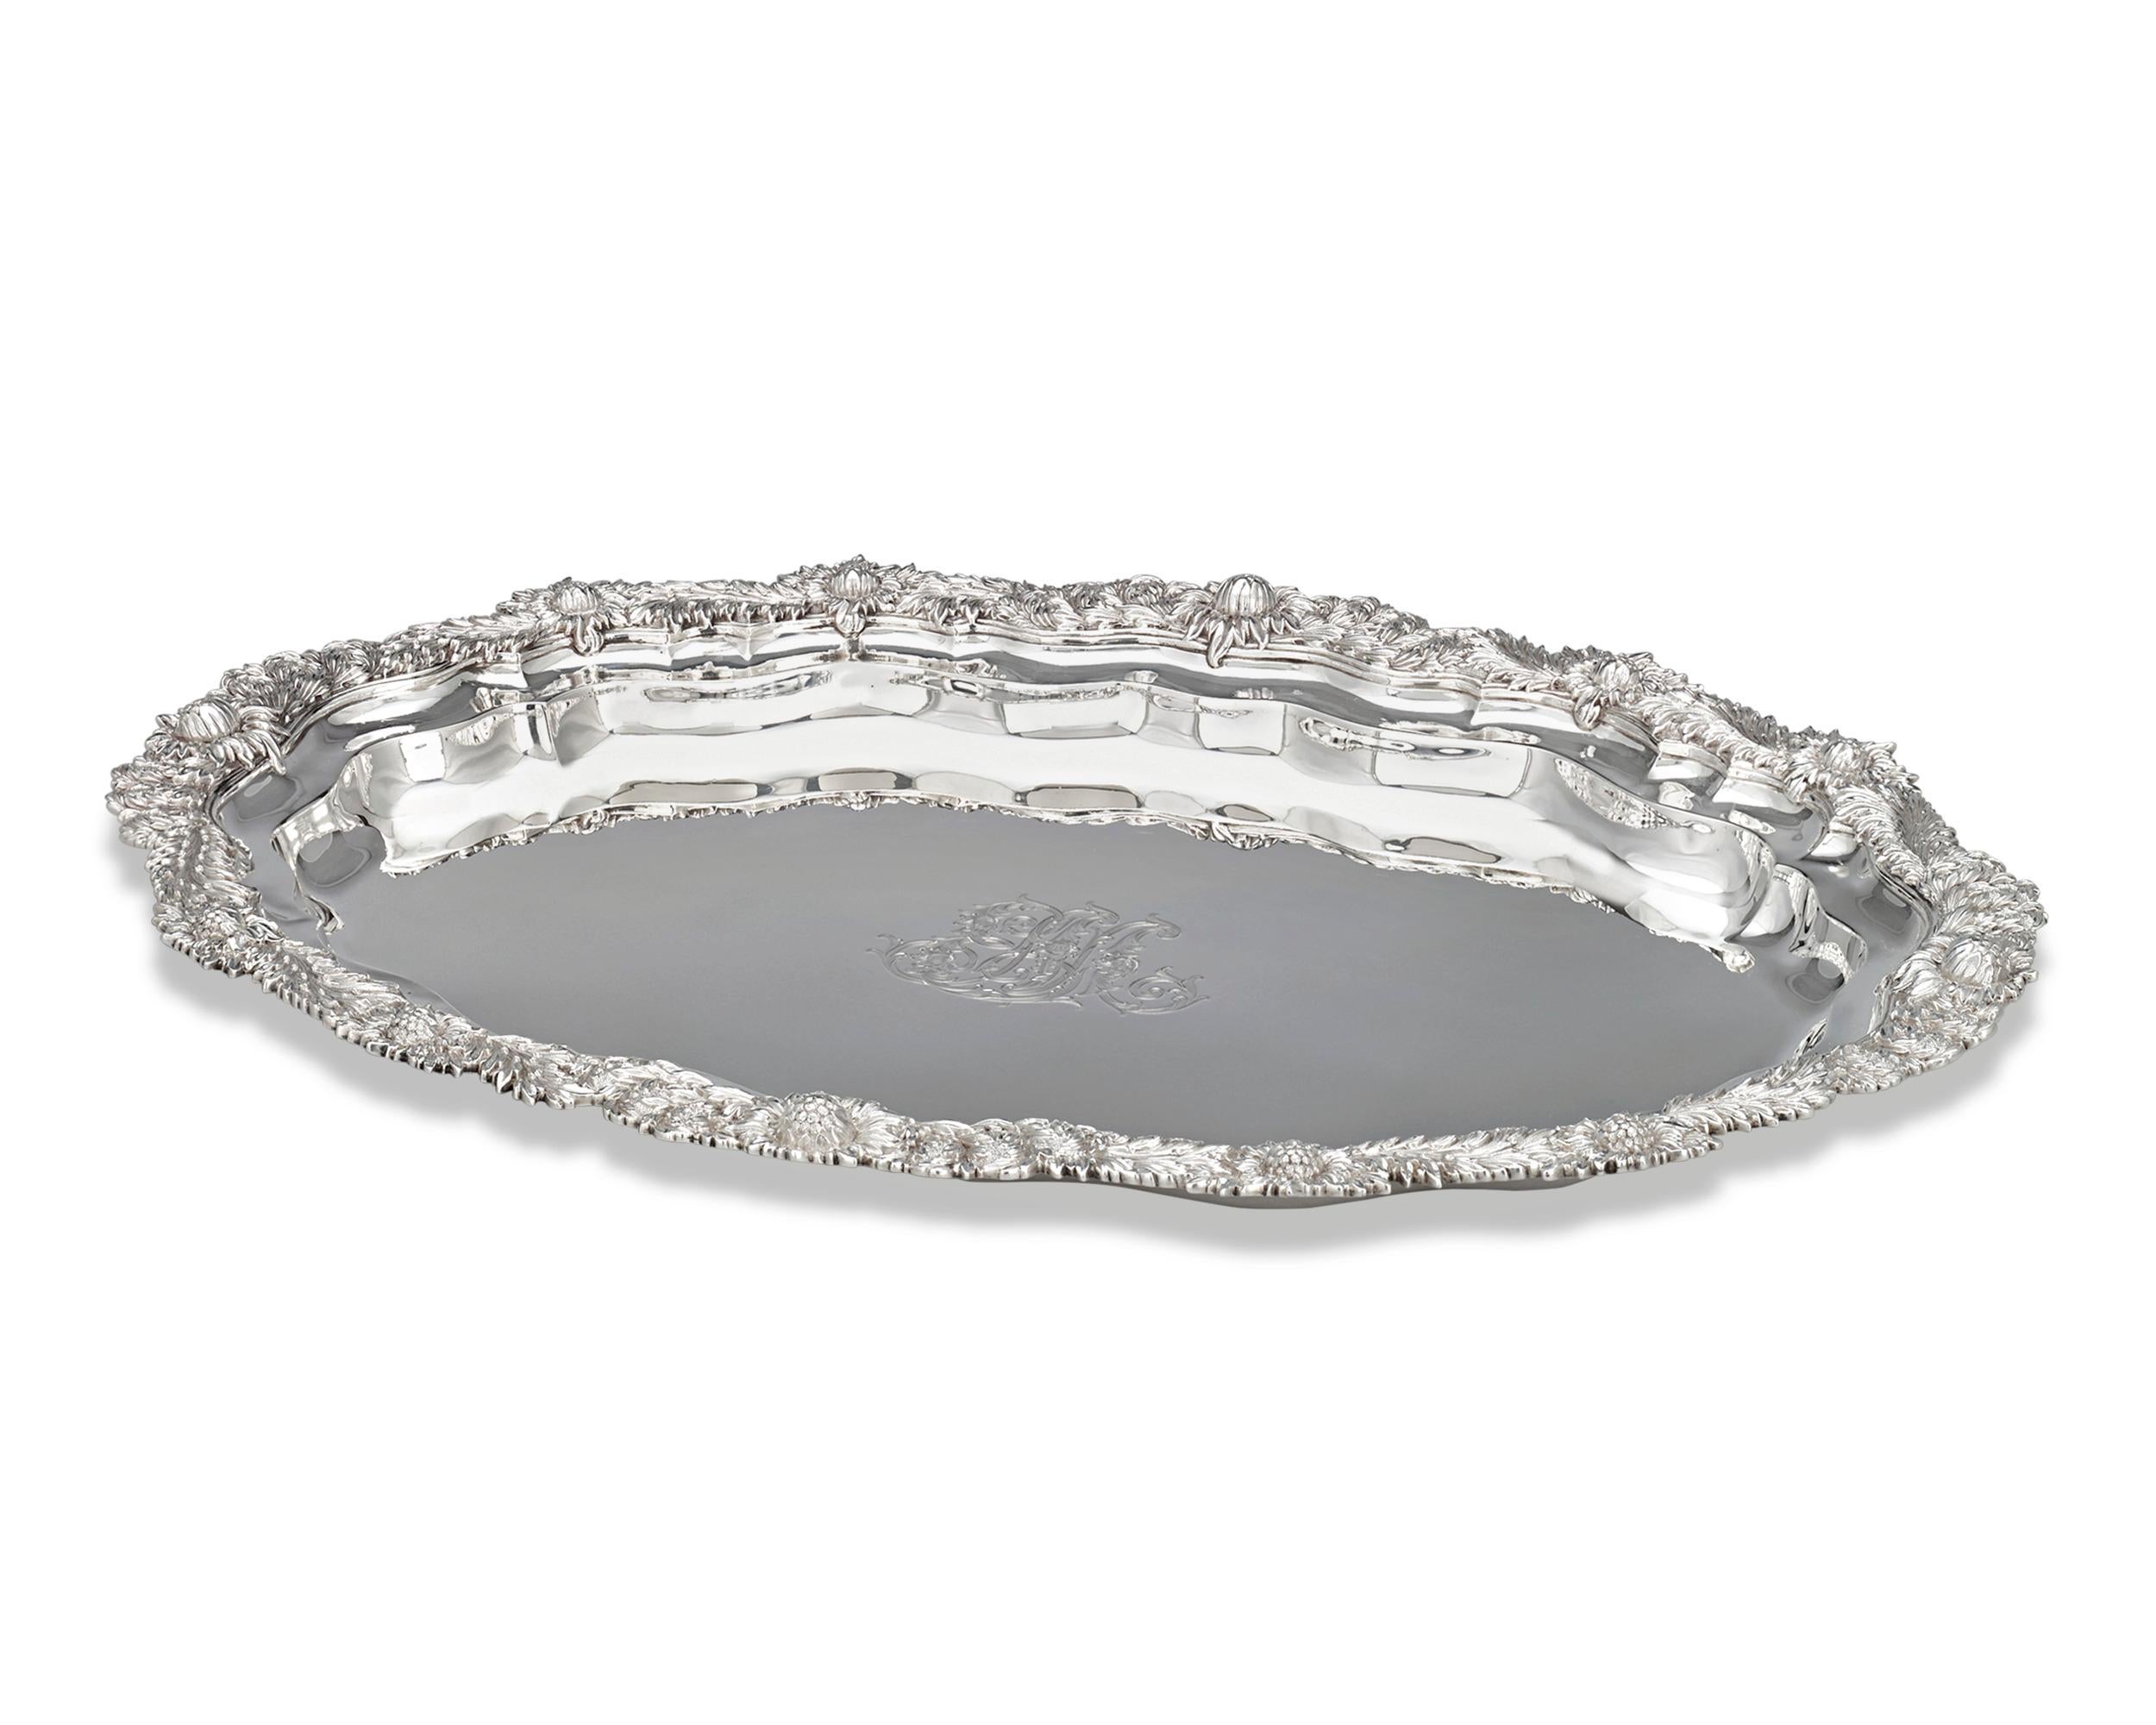 This exuberant silver tray was crafted by the incomparable Tiffany & Co. in the widely recognized Chrysanthemum pattern and exhibits the finest level of American silver craftsmanship. The motif's namesake flowers are expertly chased and applied